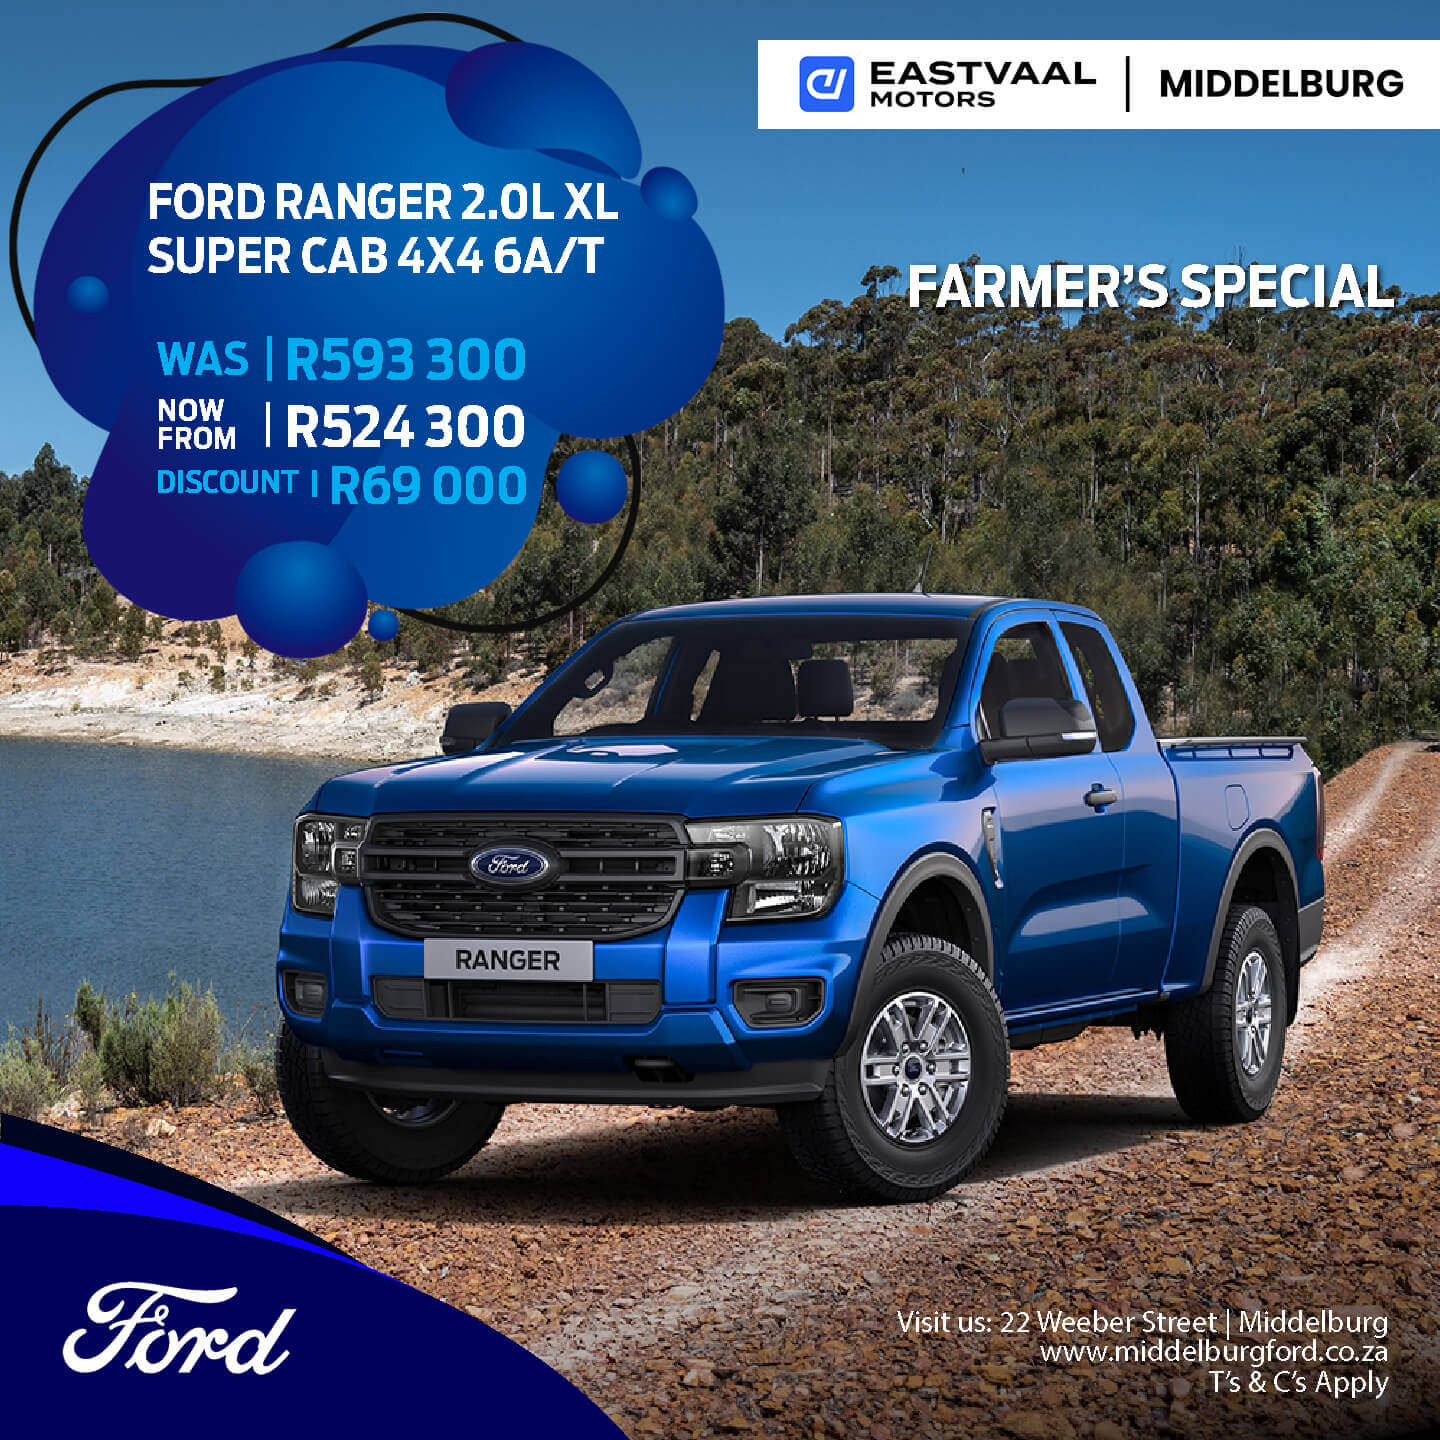 FORD RANGER 2.0L XL image from 